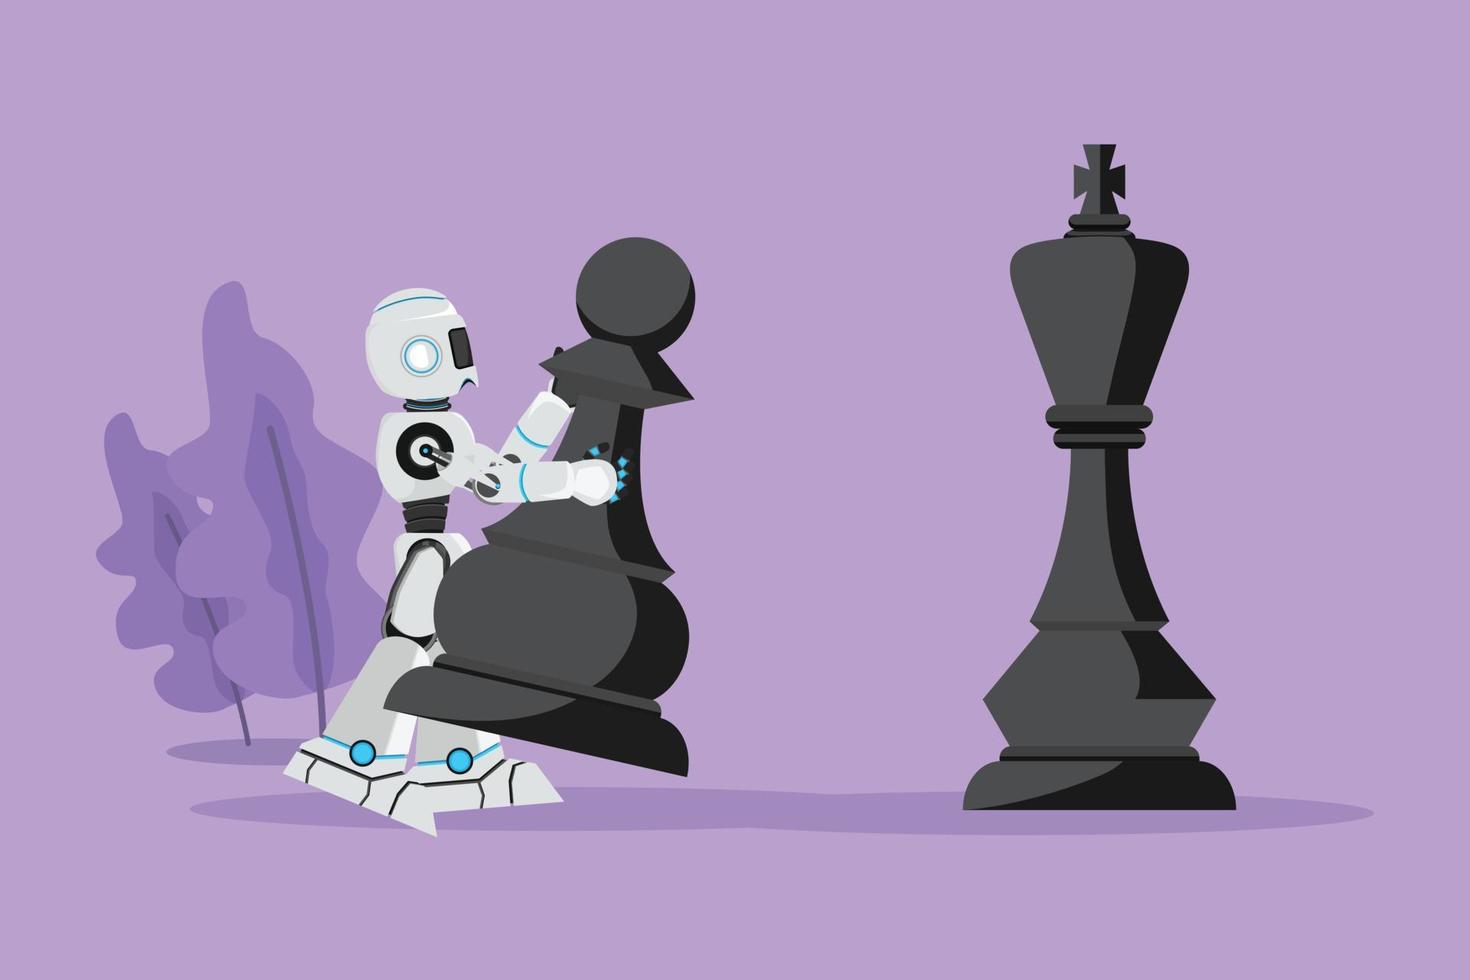 Character flat drawing robot holding pawn chess piece to beat king chess. Strategic movement game planning. Humanoid robot cybernetic organism. Robotic development. Cartoon design vector illustration